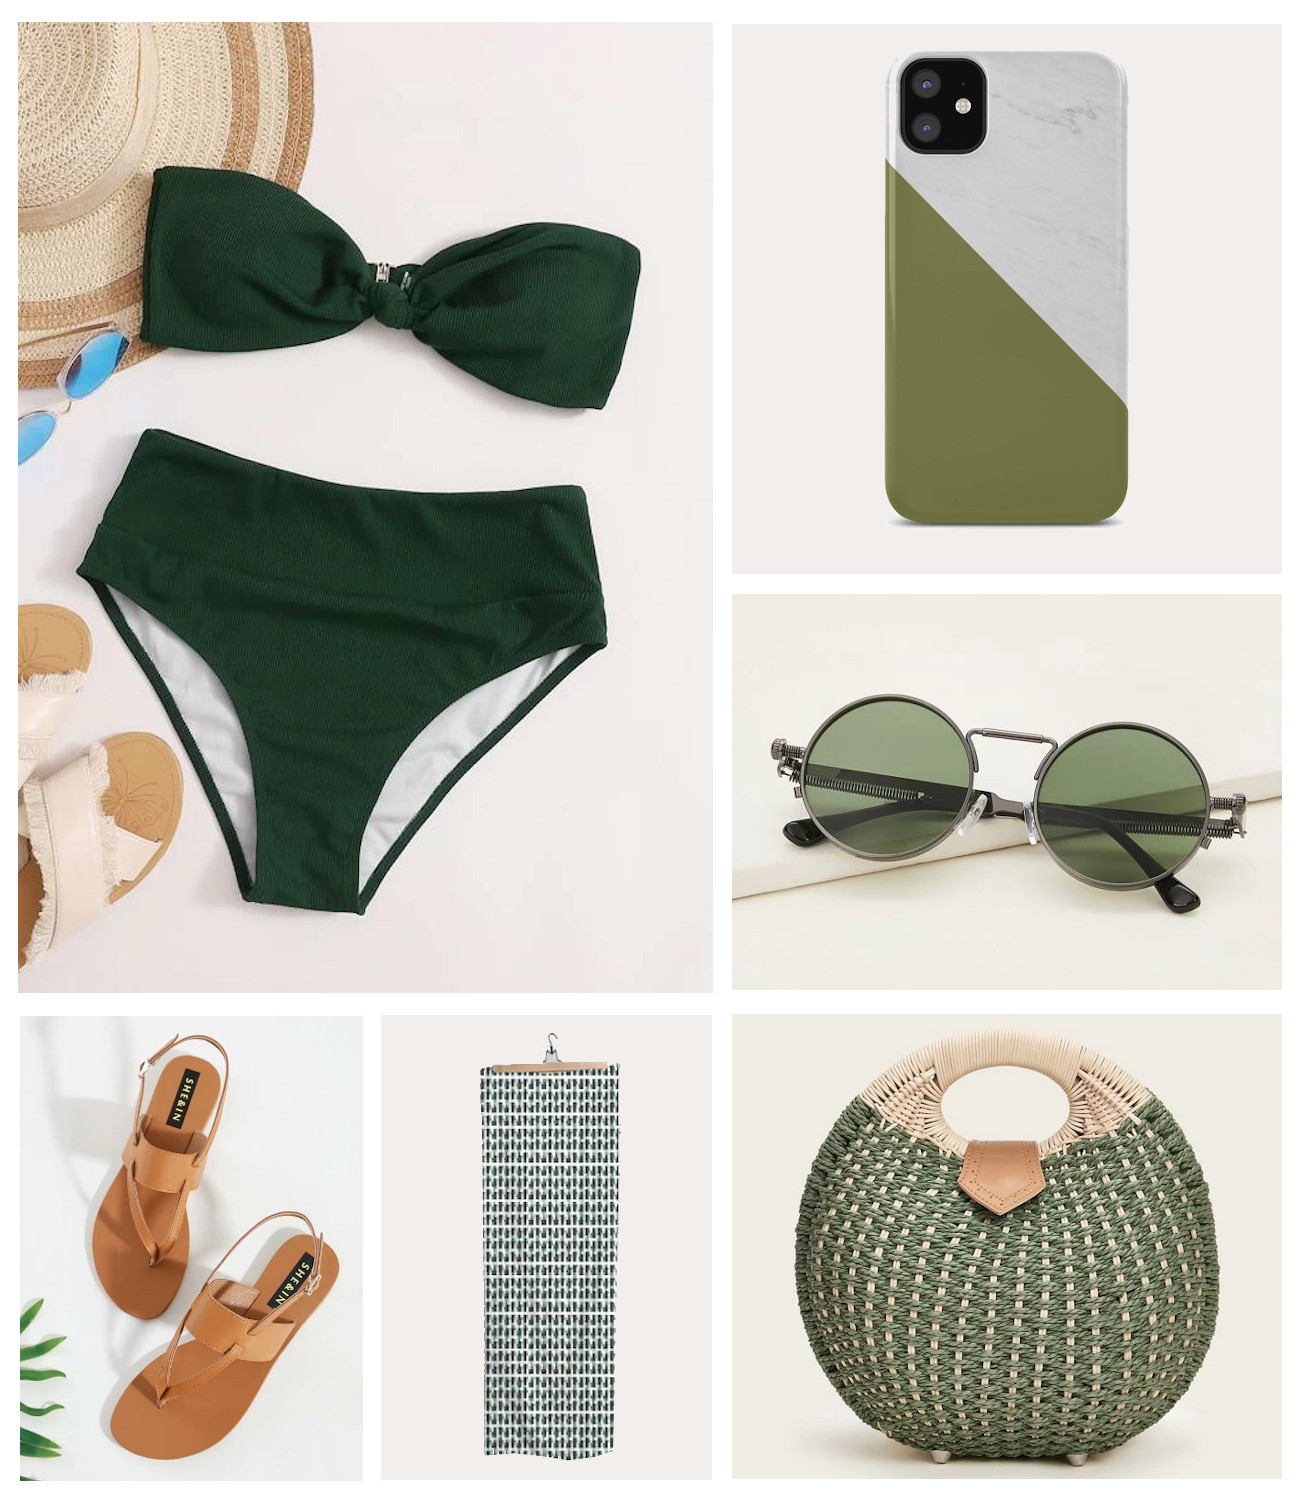 Green bikini and swimsuit ideas - Find A Way by JWP